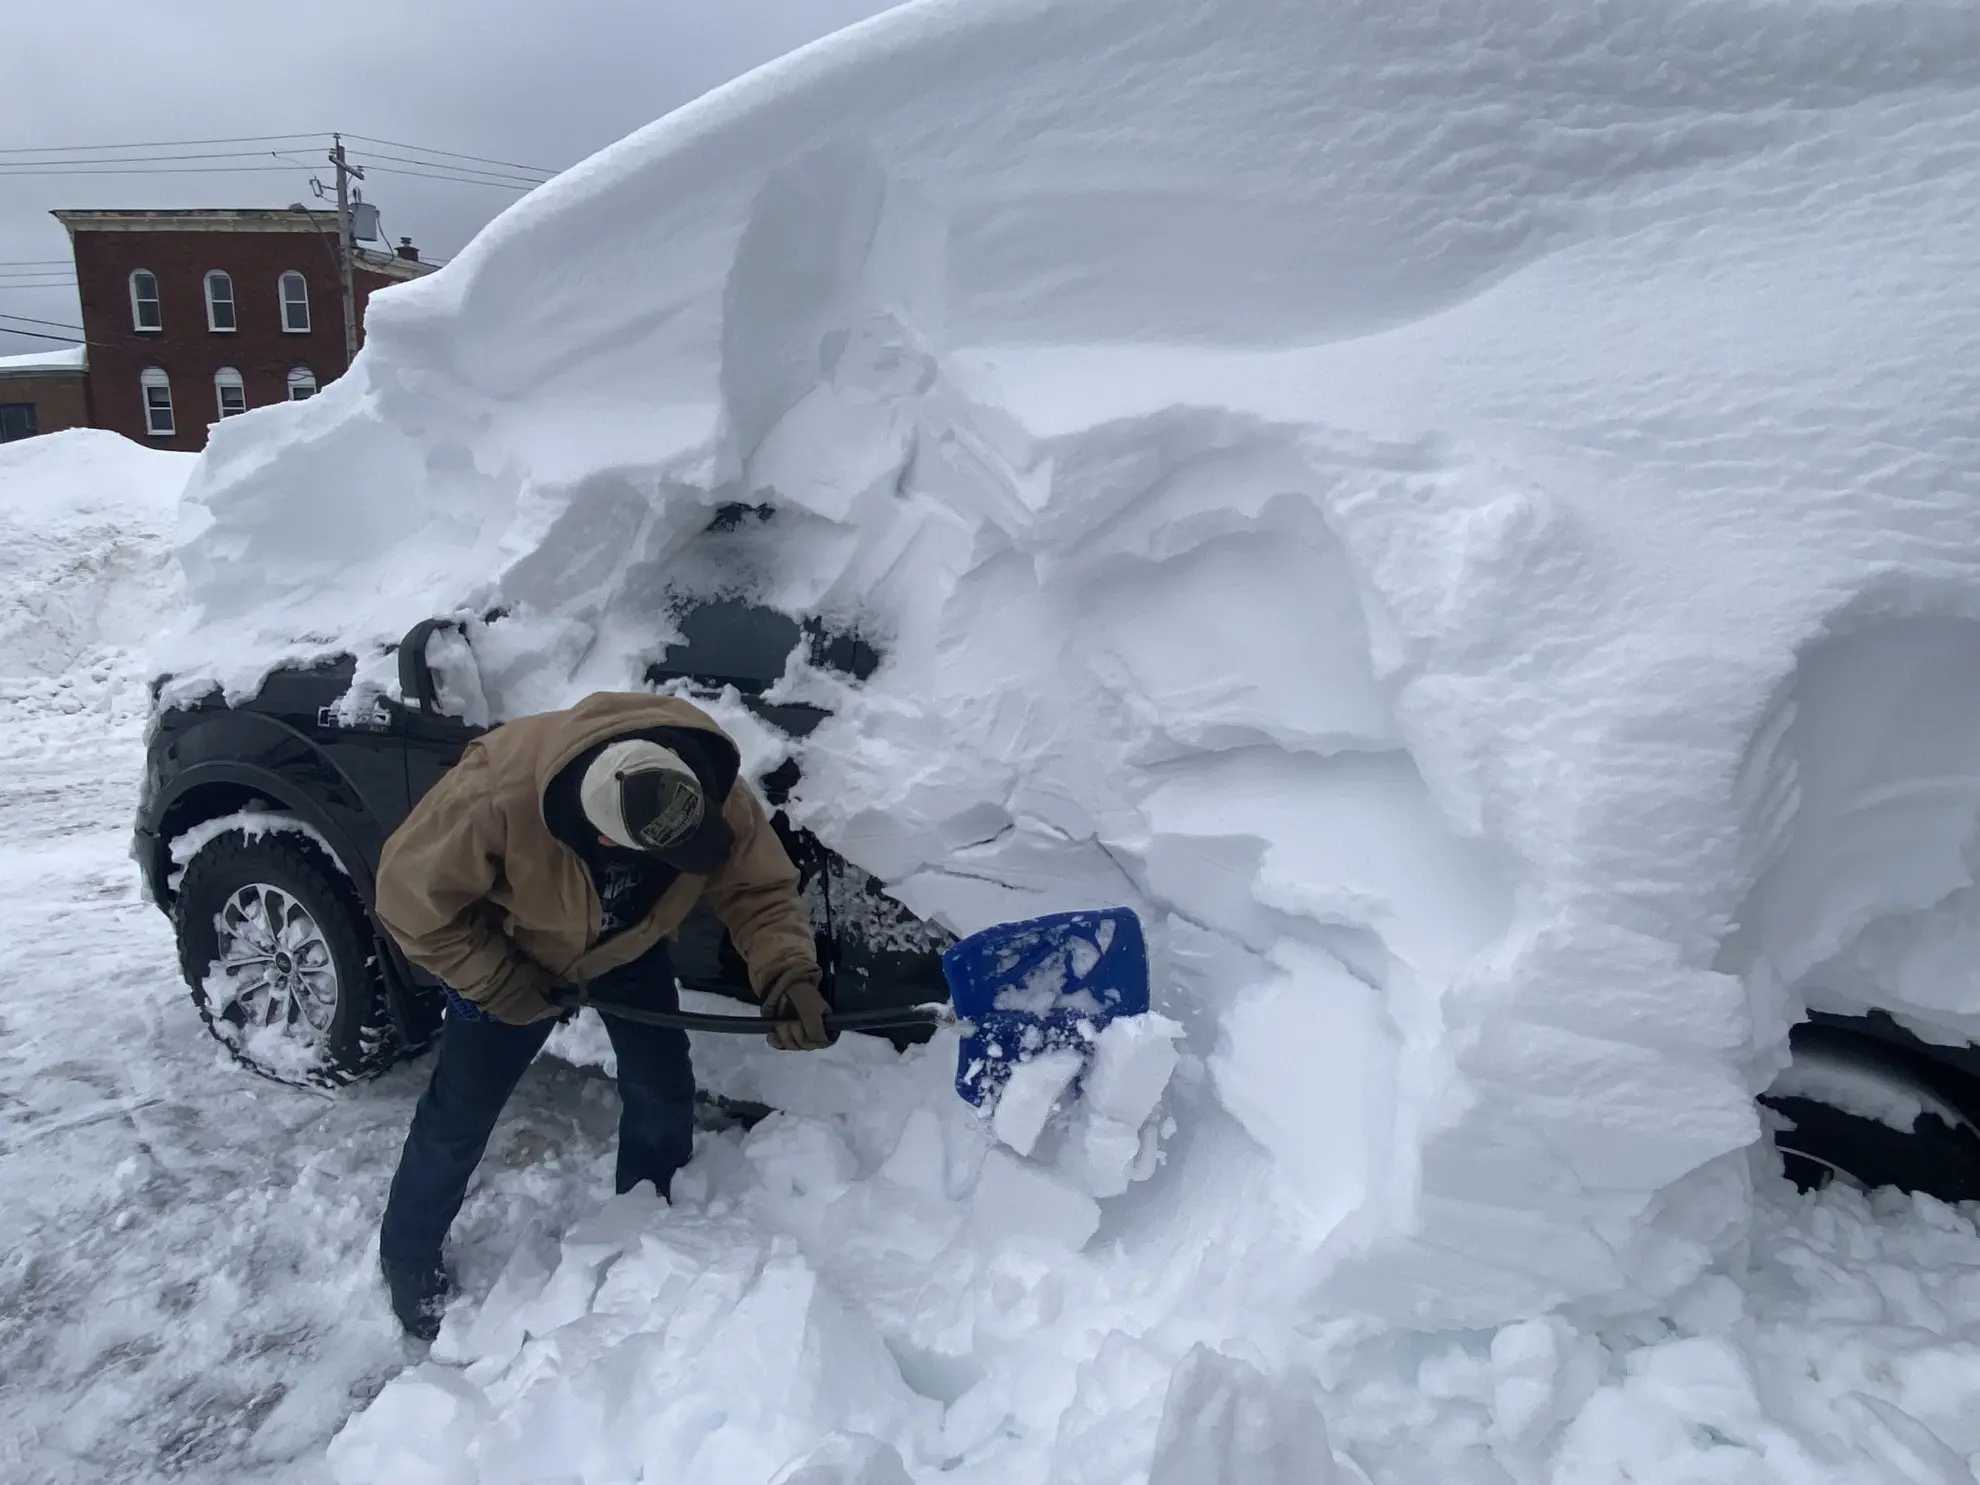 Towering snow piles could lead to very expensive problems you didn't see coming